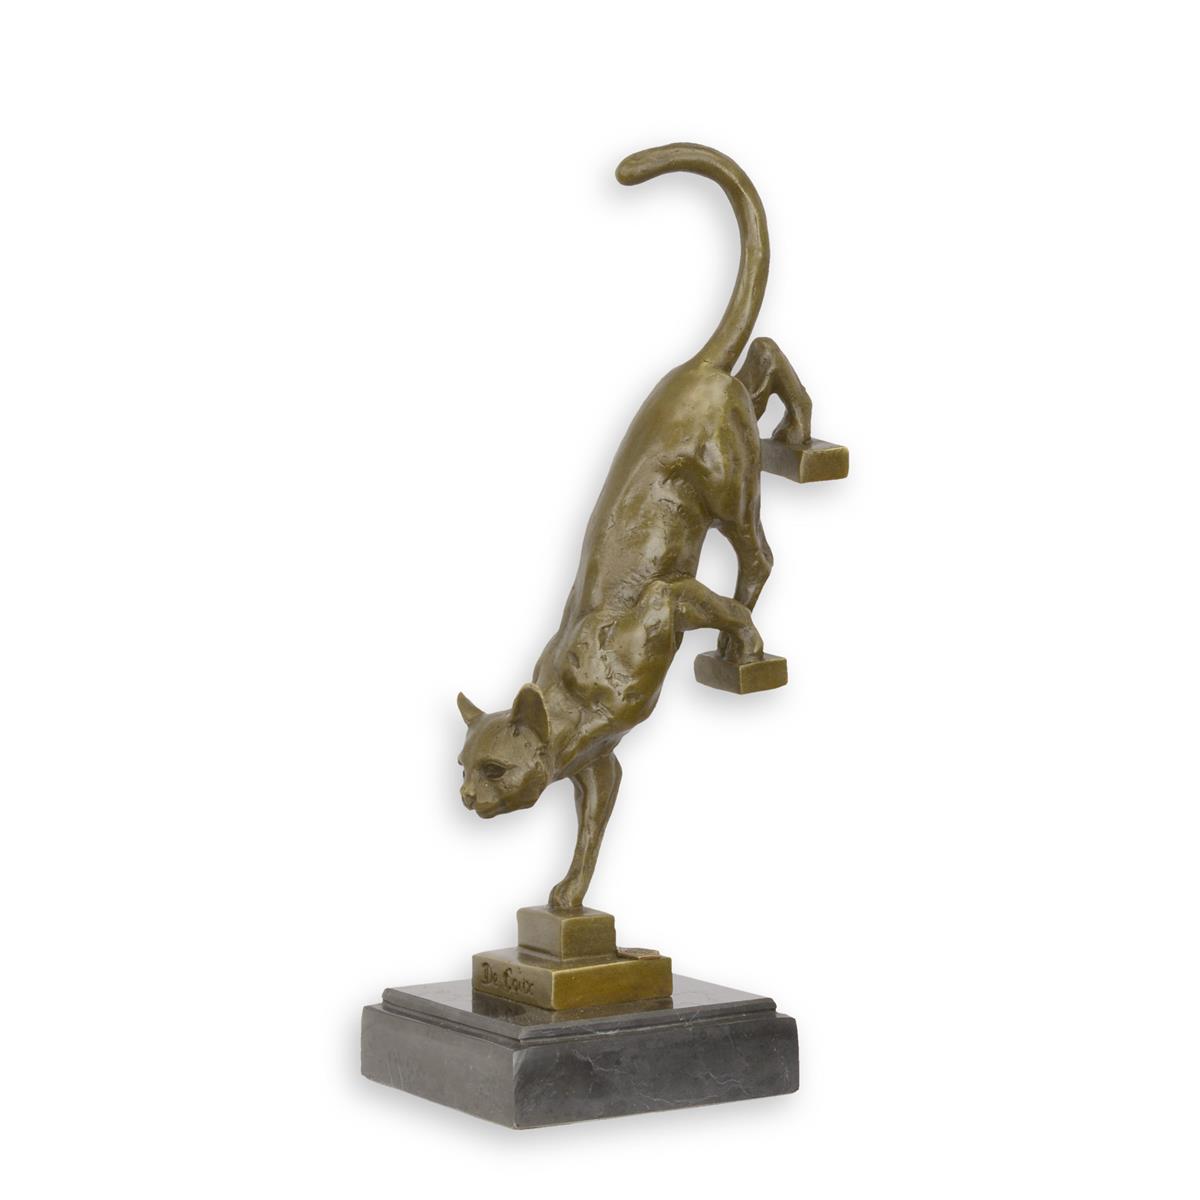 A BRONZE SCULPTURE OF A CAT DESCENDING THE STAIRS